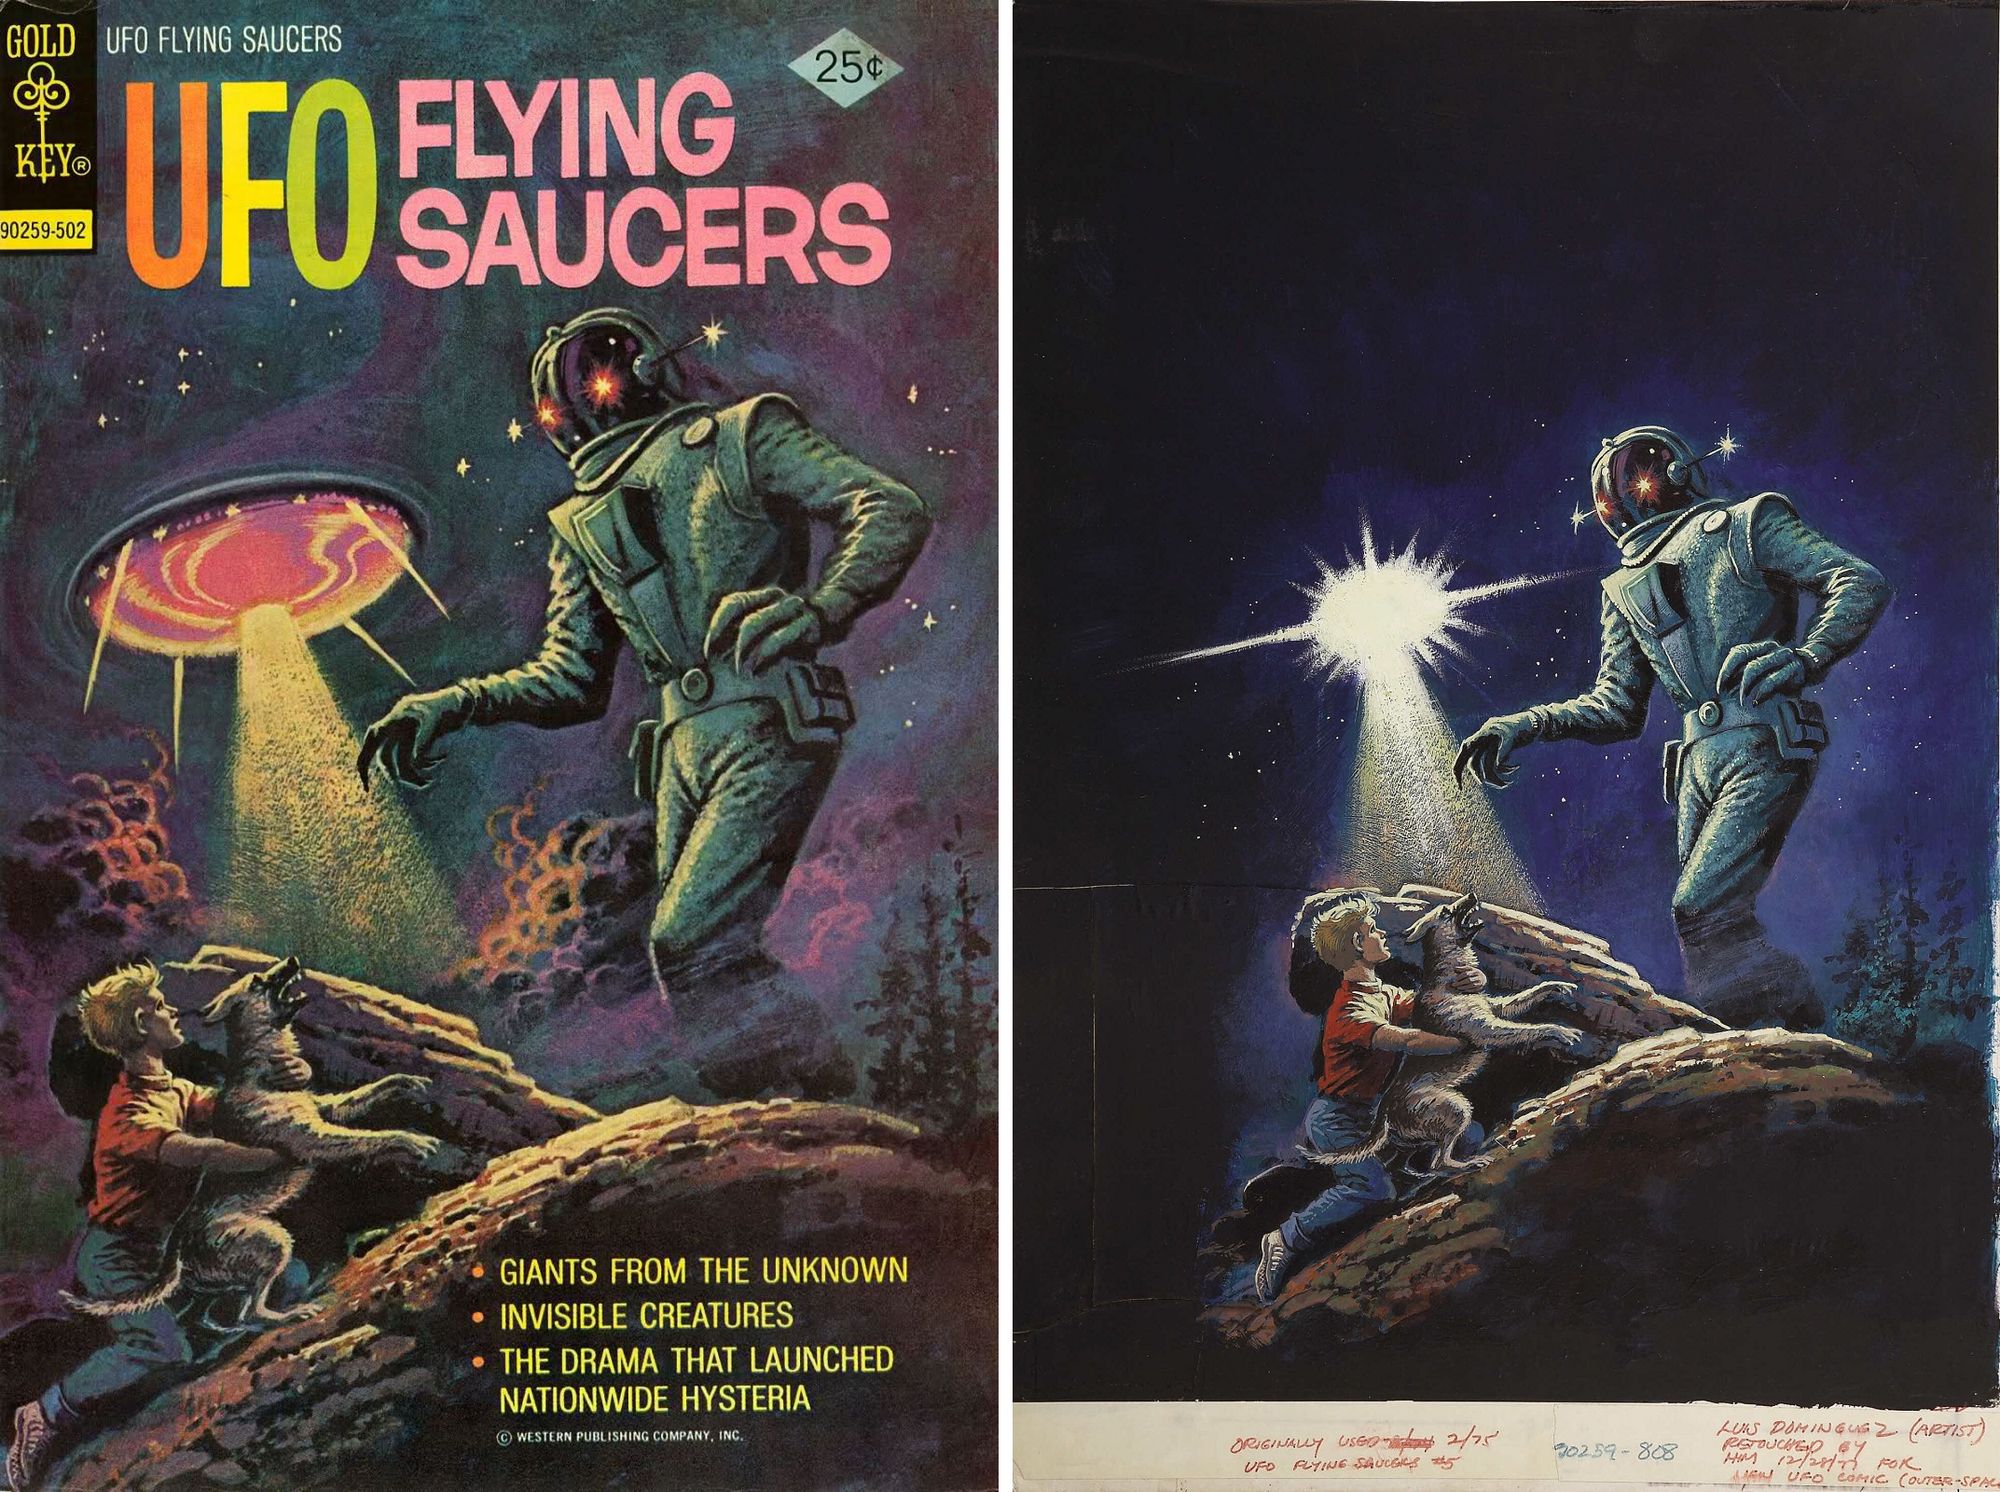 Gold Key's "UFO Flying Saucers"